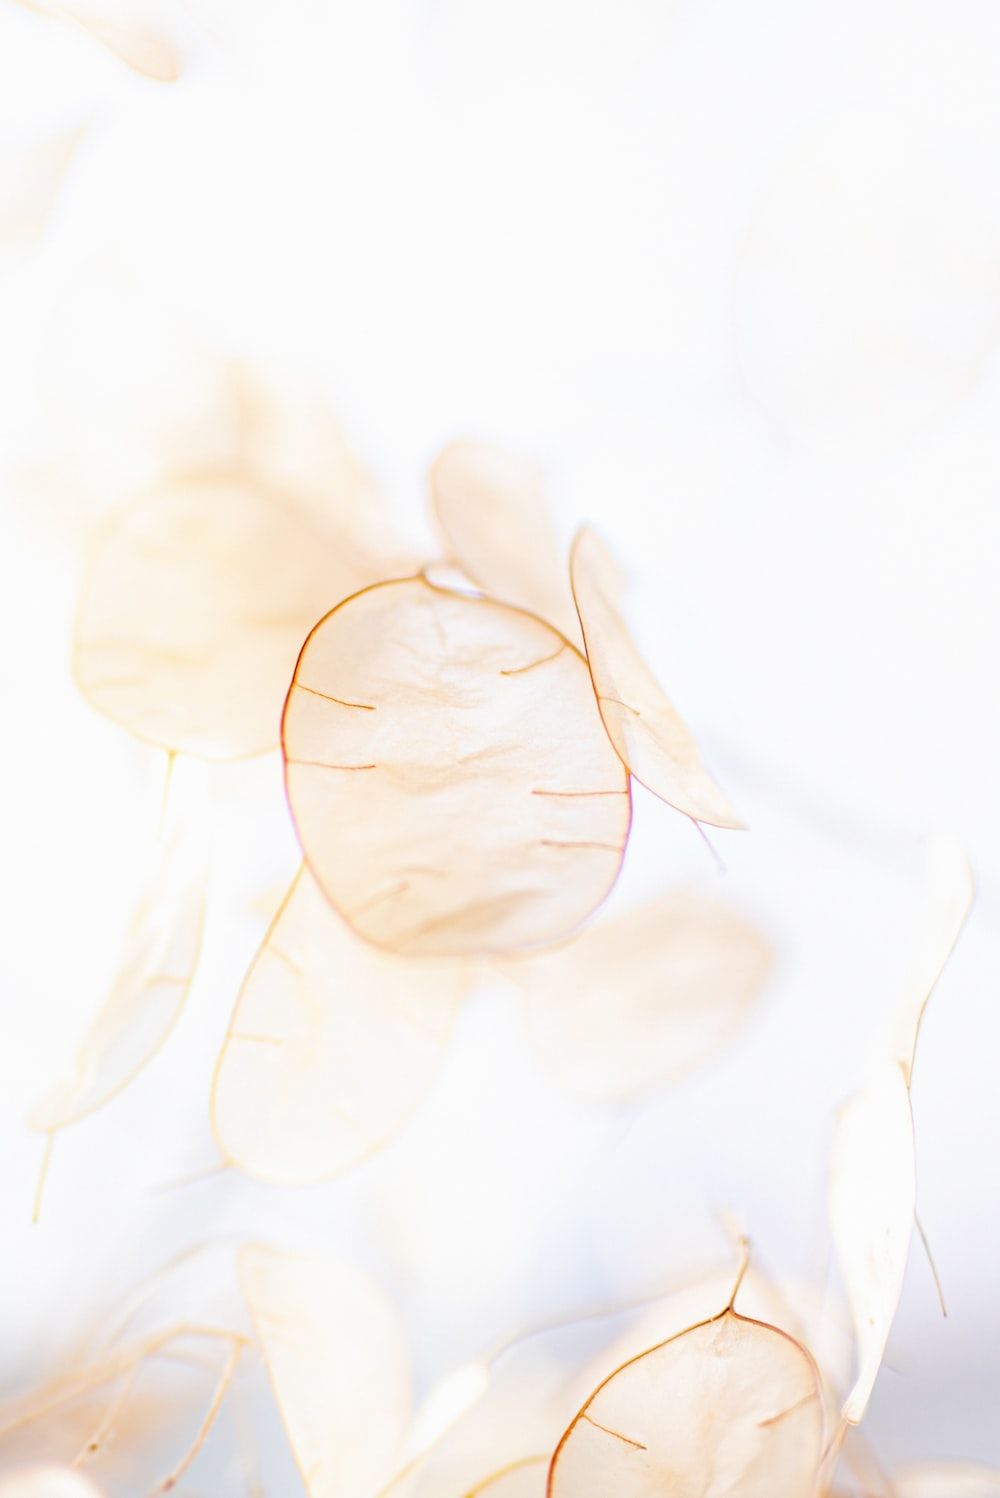 A close up of a string of fairy lights on a white background - Beige